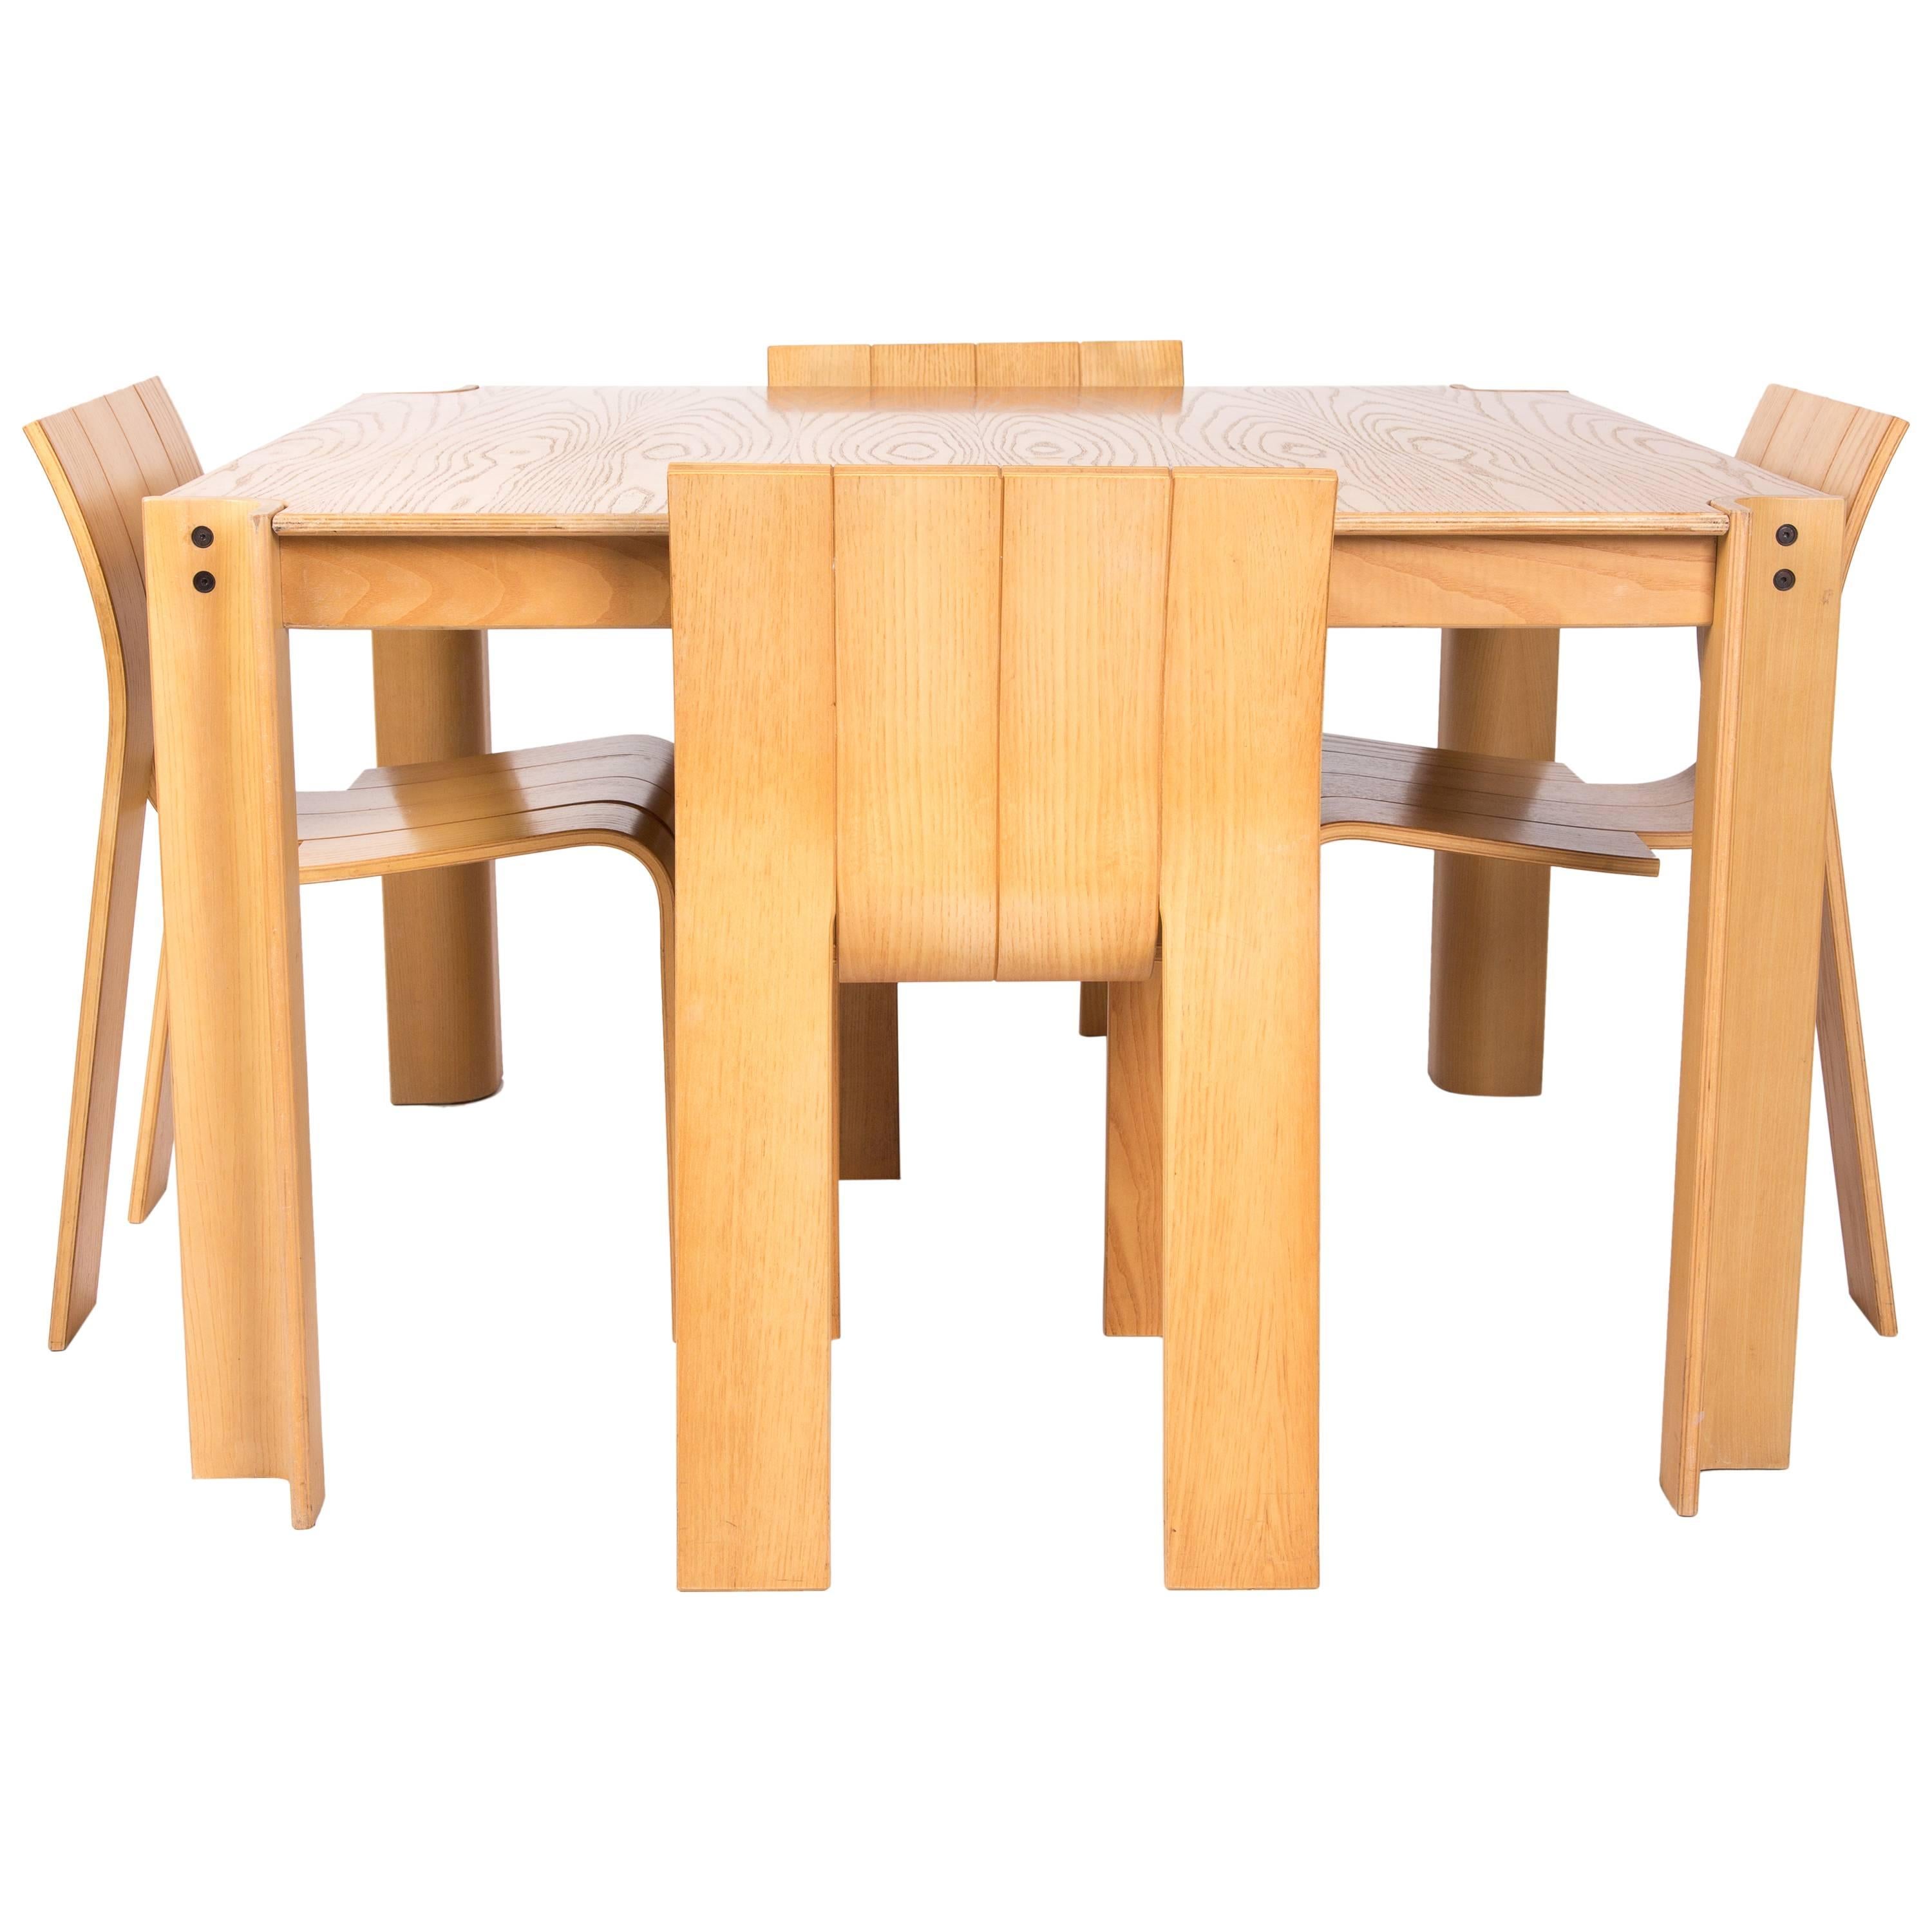 GIJS BAKKER STRIP CHAIRS with the strip table